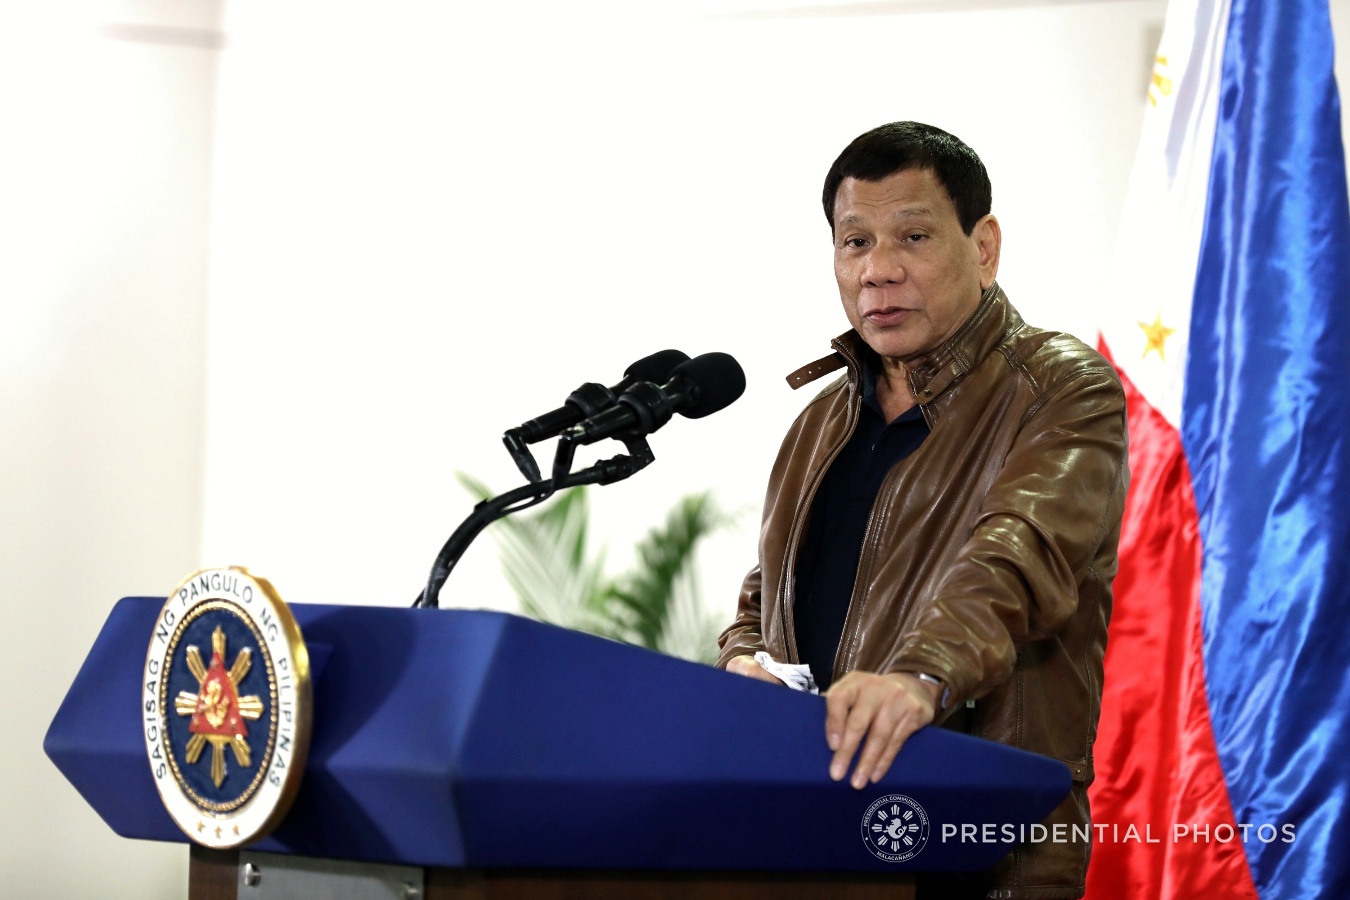 President Rodrigo Roa Duterte, in his speech during his arrival at the Francisco Bangoy International Airport in Davao City on January 26, 2018, announces that the heads of state and government from members countries of the Association of Southeast Asian Nations (ASEAN) as well as India have reaffirmed their commitment to work together in fighting terrorism. SIMEON CELI JR./PRESIDENTIAL PHOTO